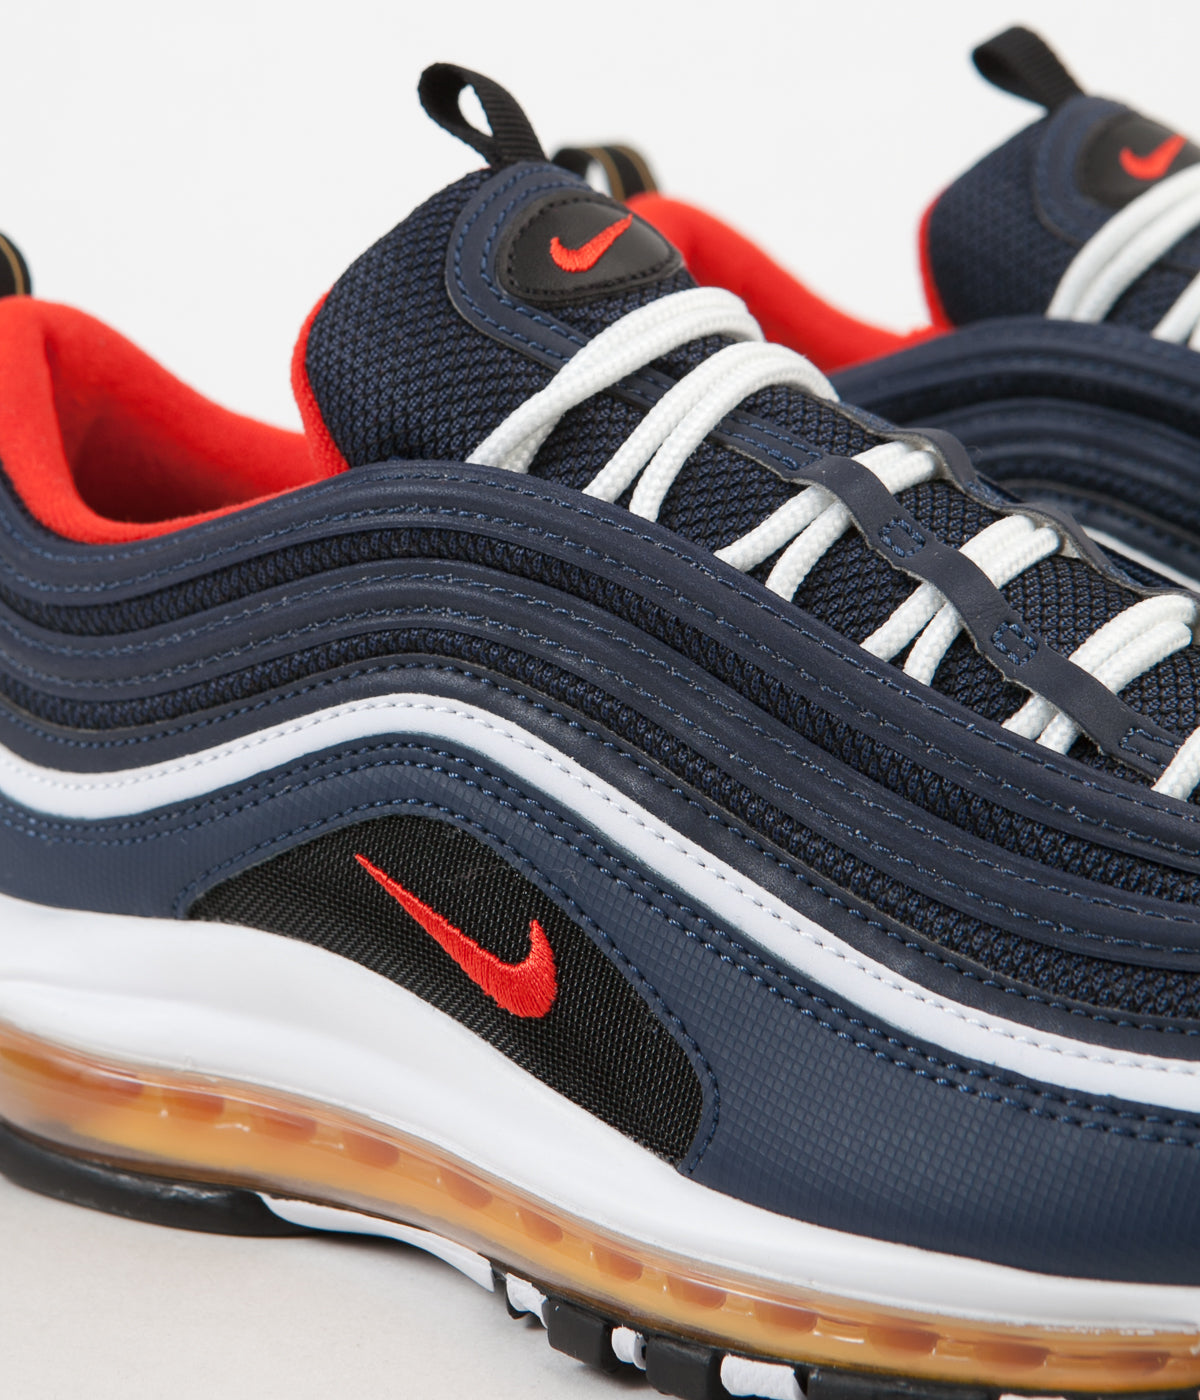 Nike Air Max 97 Shoes - Midnight / Habanero Red - Black - White | Always in Colour